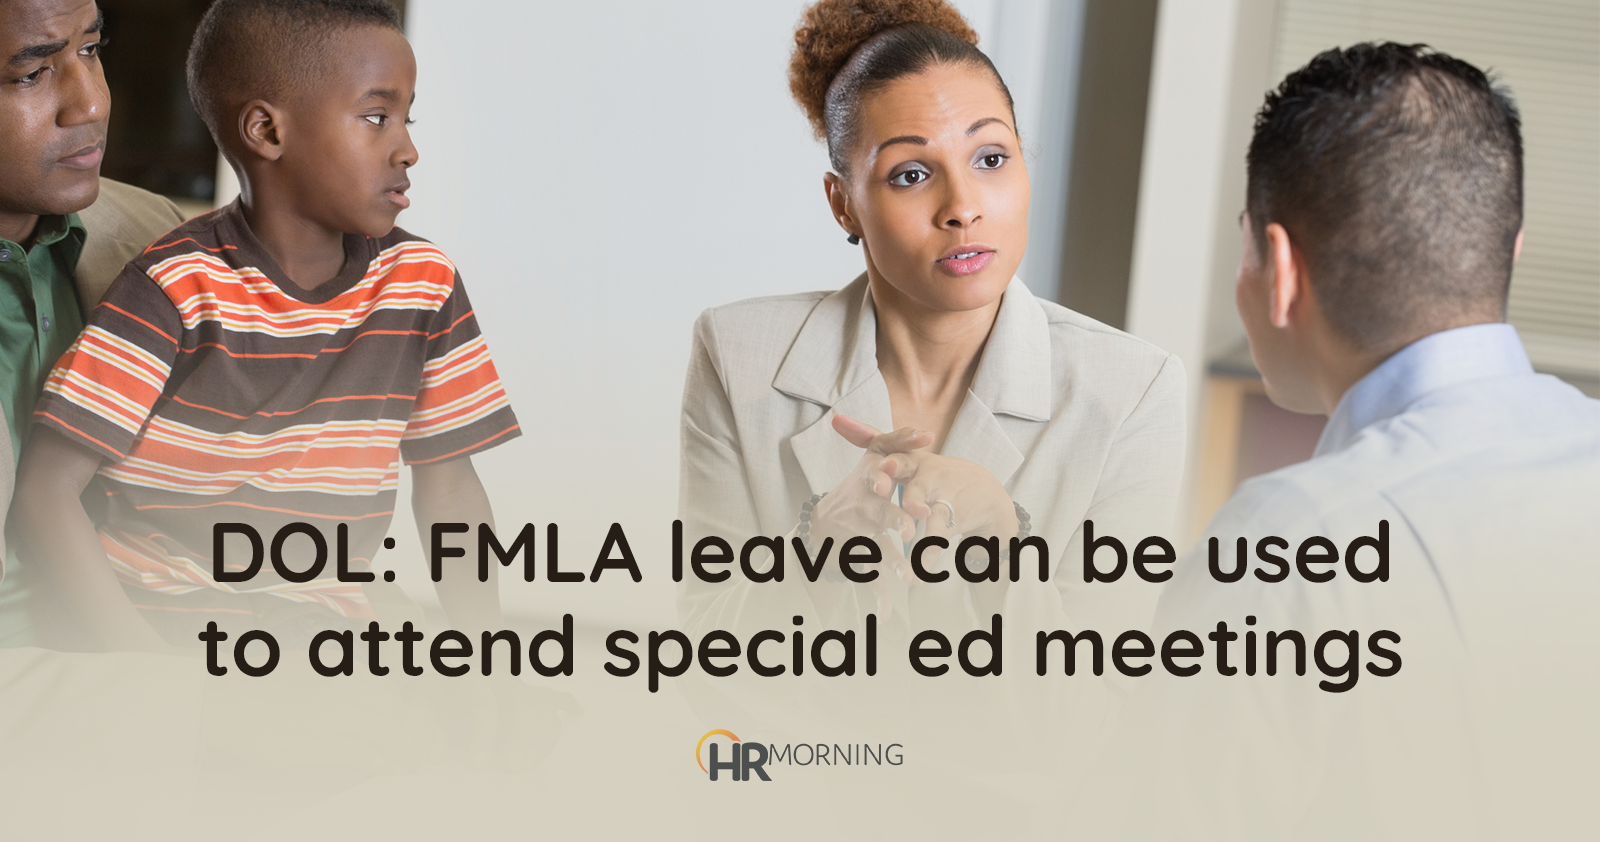 DOL: FMLA leave can be used to attend special ed meetings